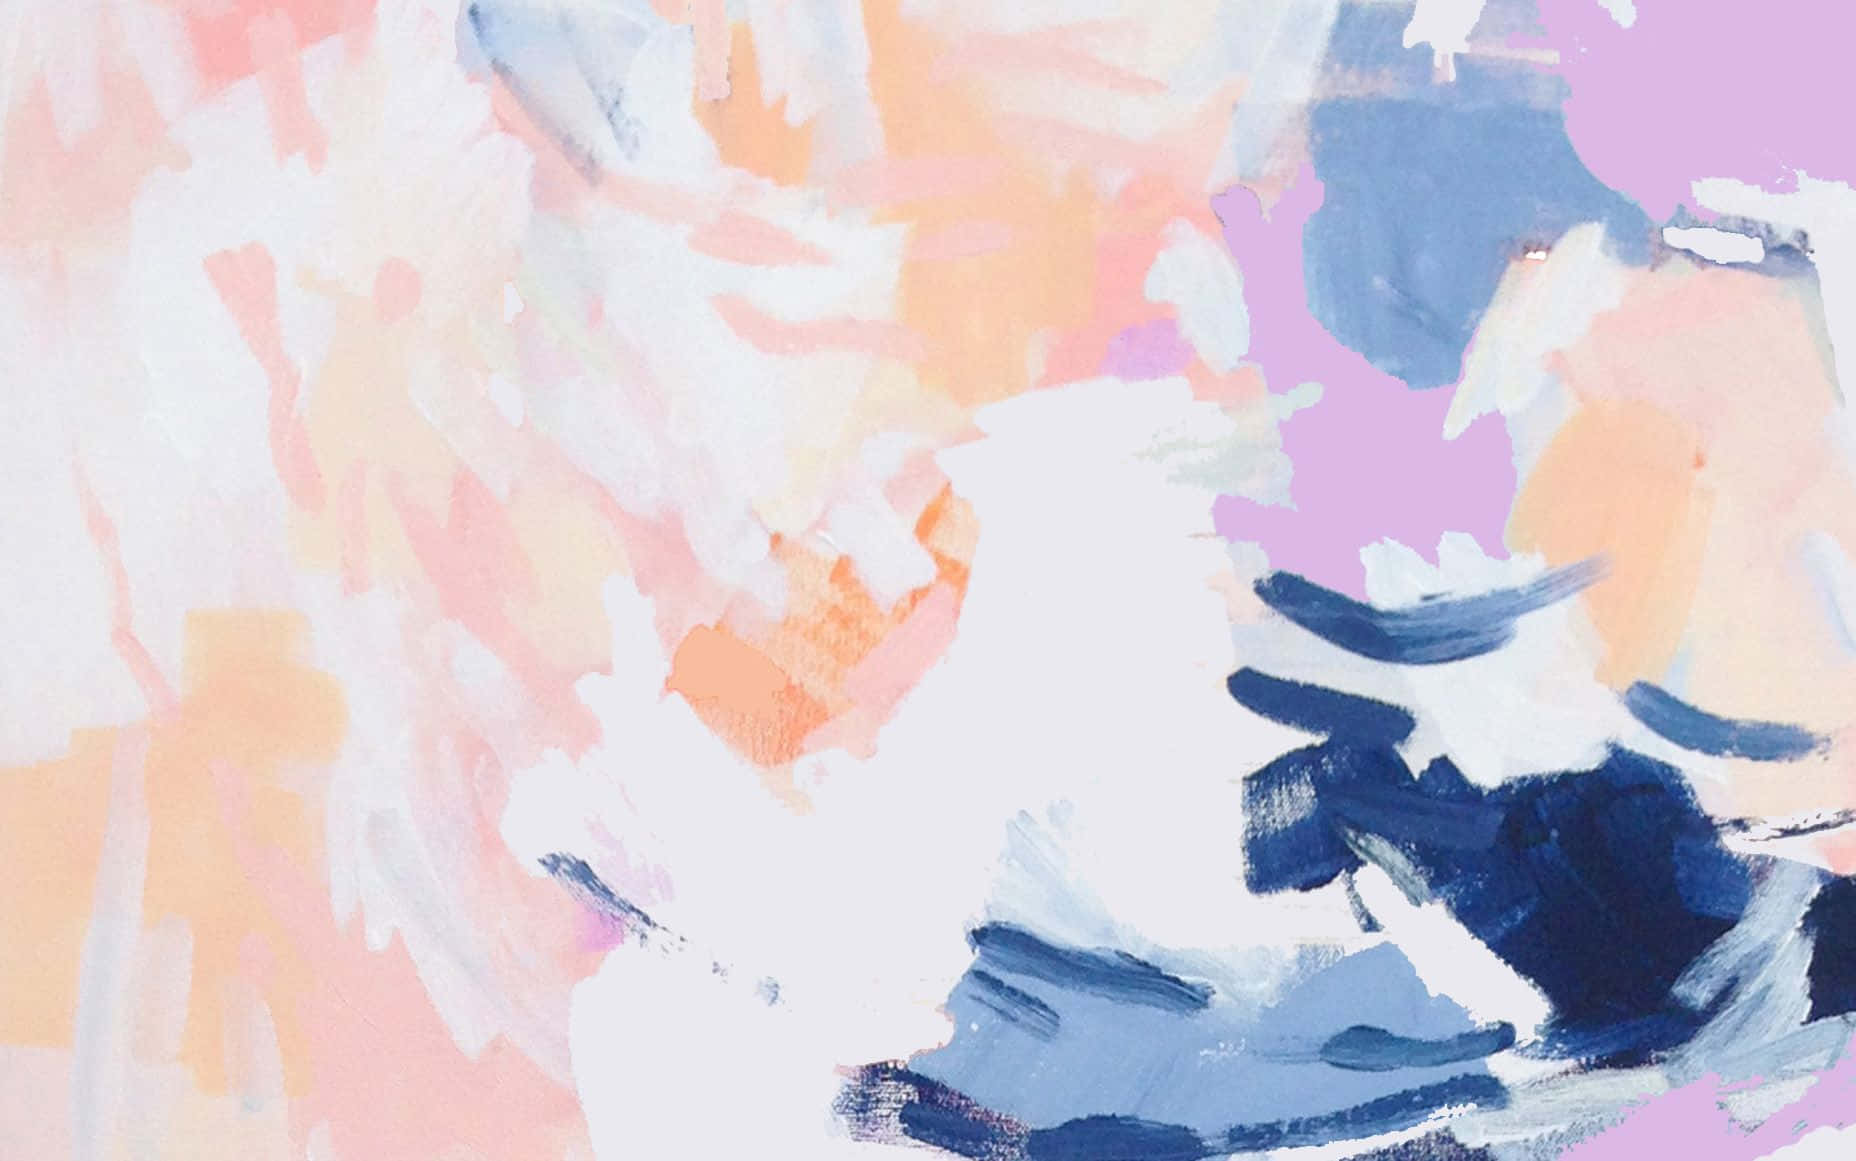 A close up of a painting with blue, pink and white paint strokes - IMac, watercolor, abstract